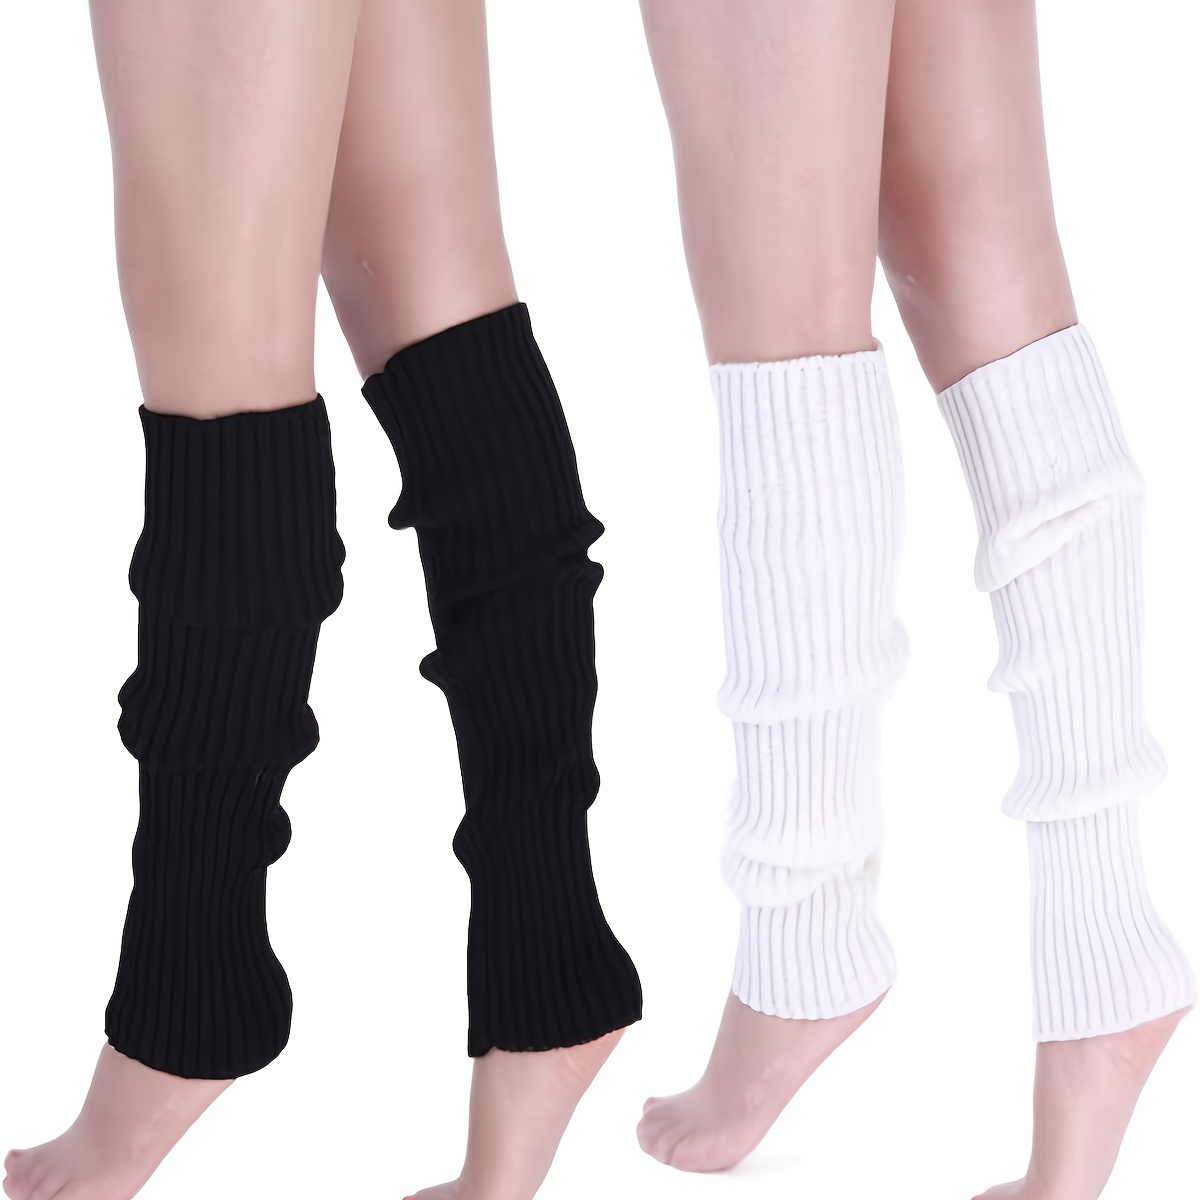  Clothirily Leg Warmers - Fashion Knit Neon Leg Warmers for  Women 80s Sports Party Yoga Accessories 2 Pairs, Black & White